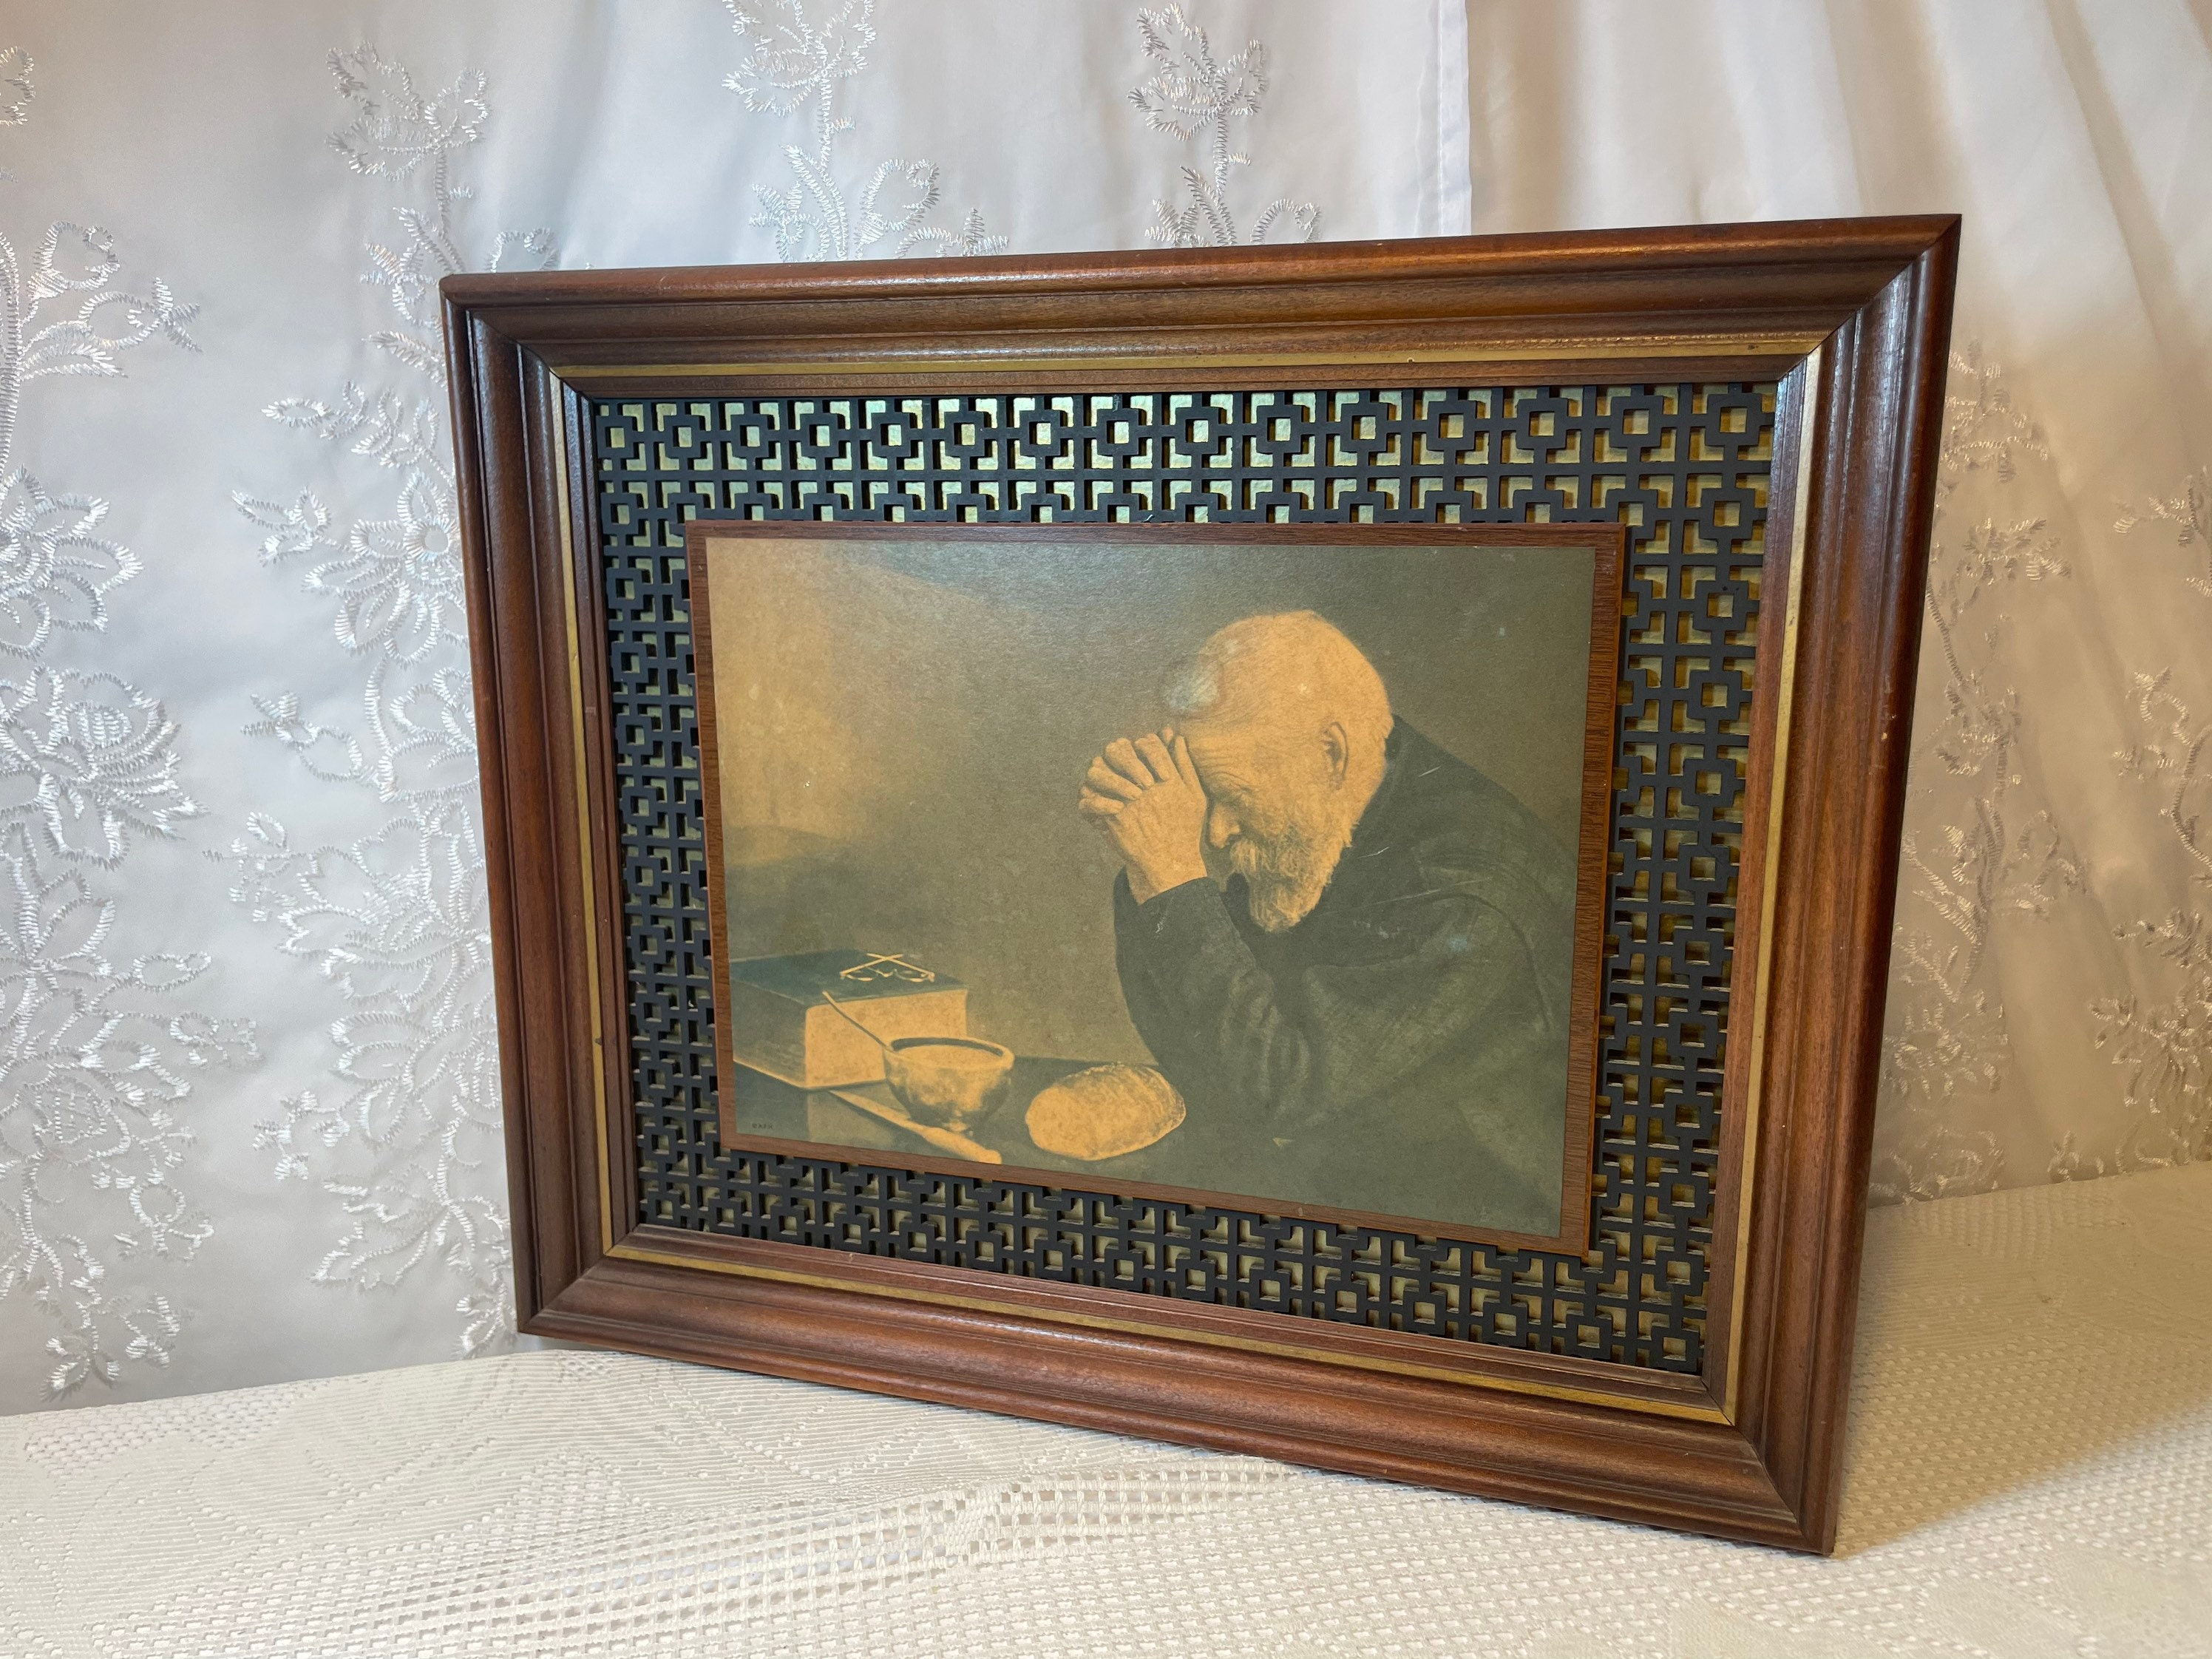 Daily Bread Man Praying Grace Thanksgiving at Dinner Table Grace Religious  Art Print 8x10 Black Frame + Glass Sentimental Gift Ready to Hang Overall